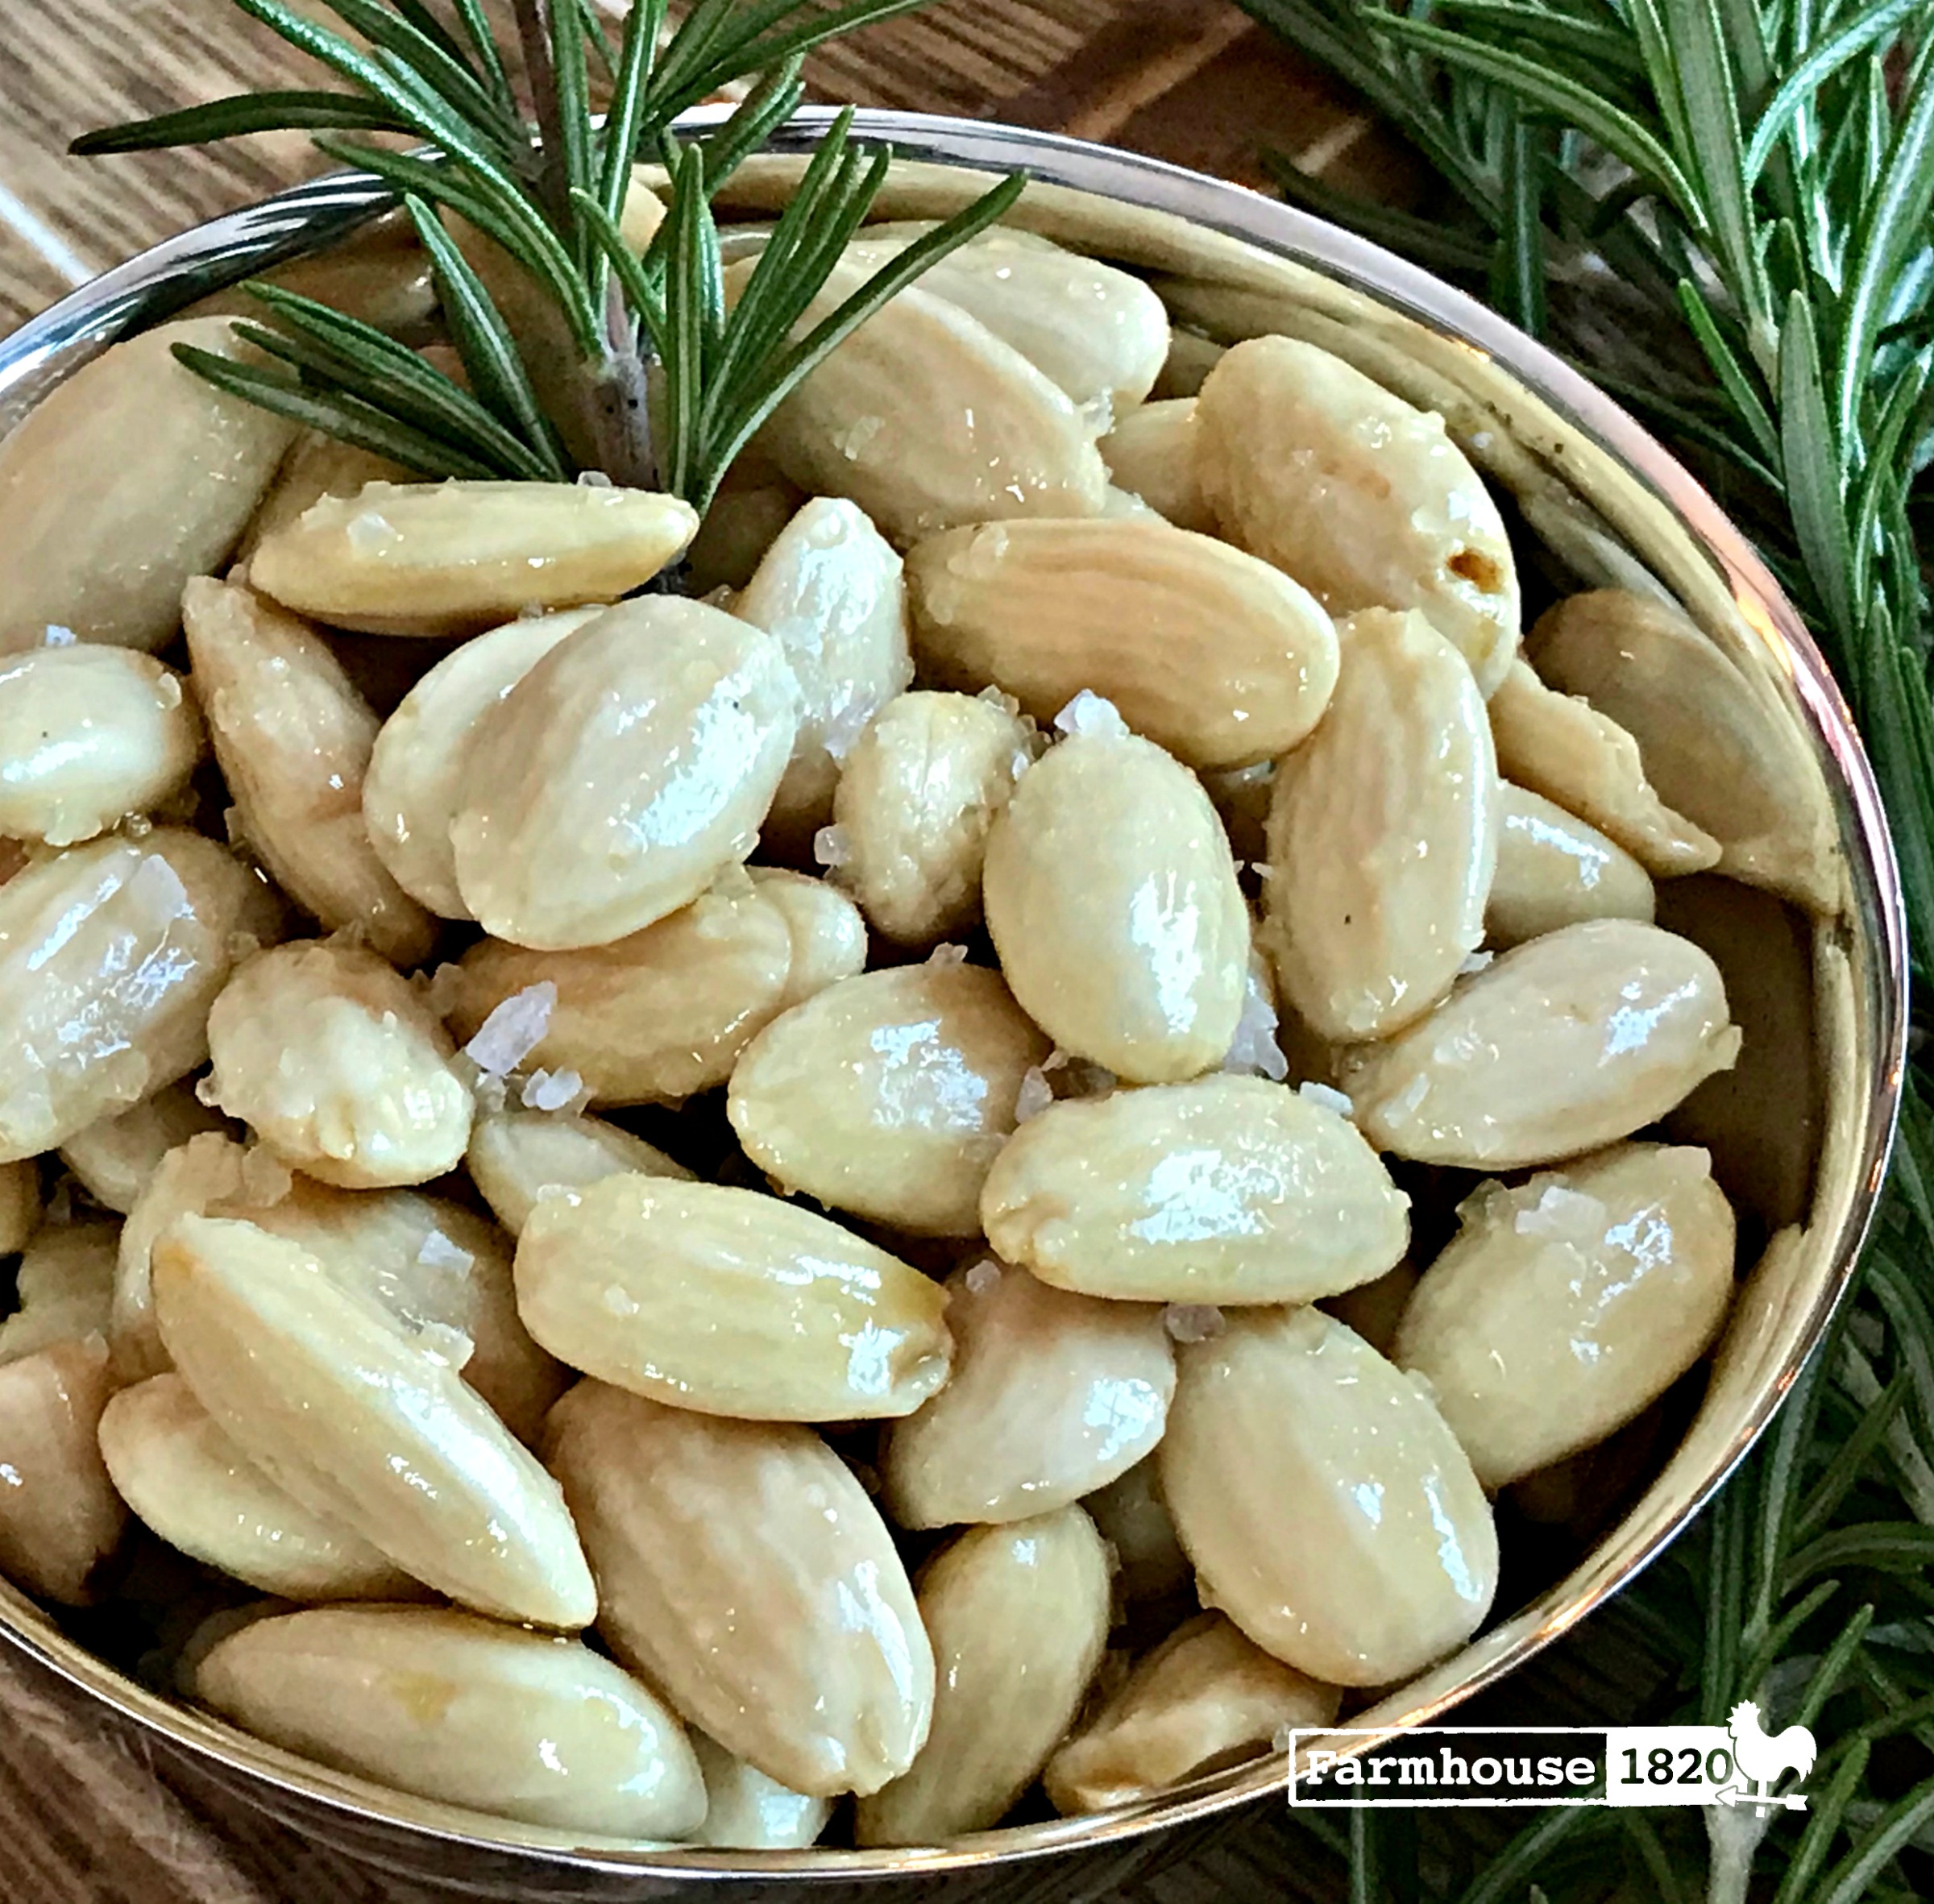 rosemary infused almonds